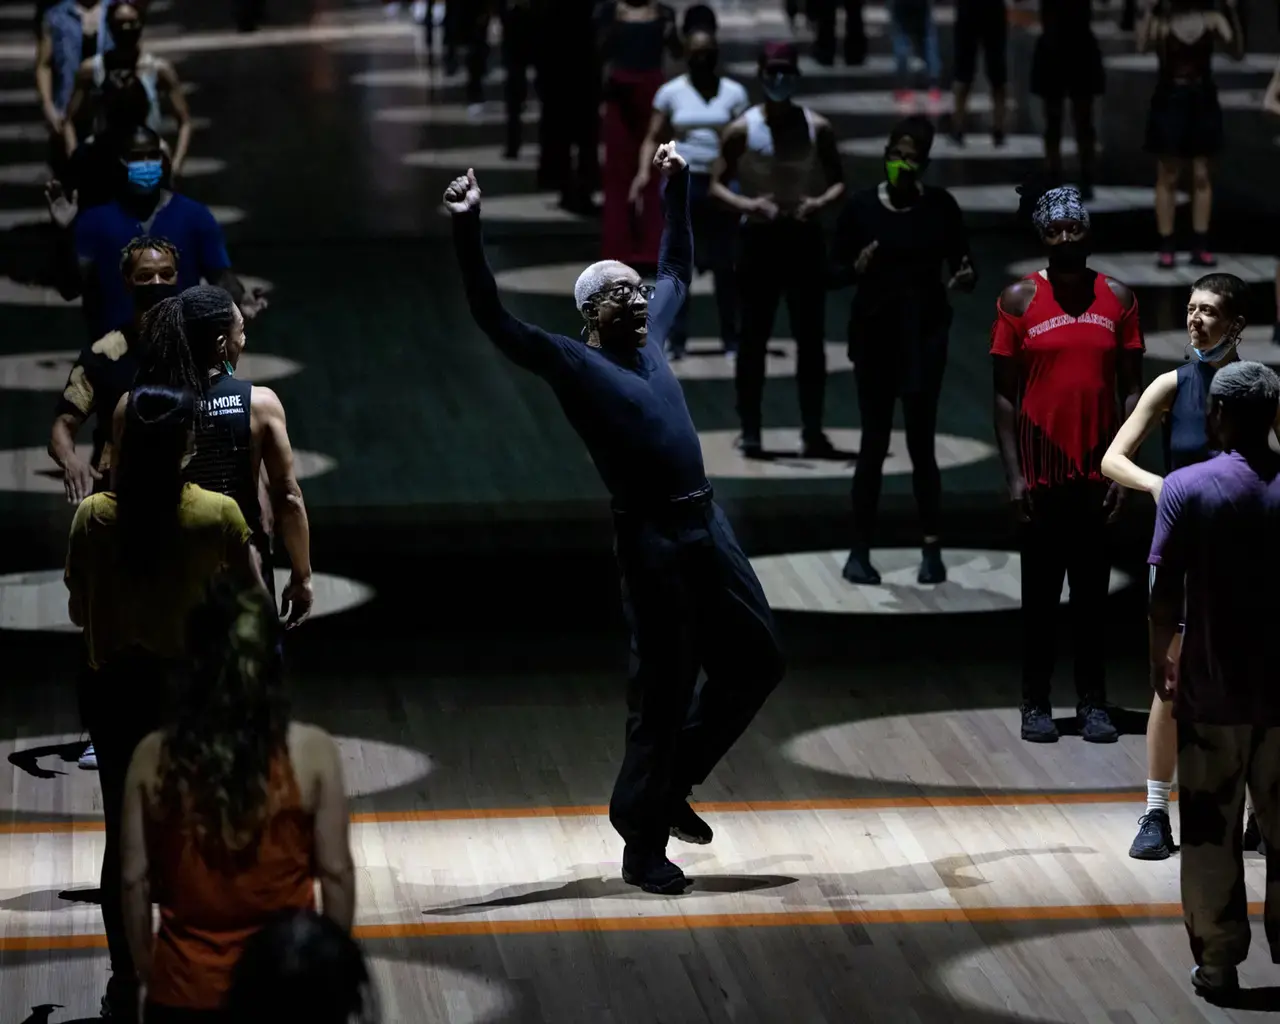 Bill T. Jones, creator, director, and choreographer of Deep Blue Sea, accompanied by a group of community dancers during a performance in New York. Photo by Maria Baranova.&nbsp;